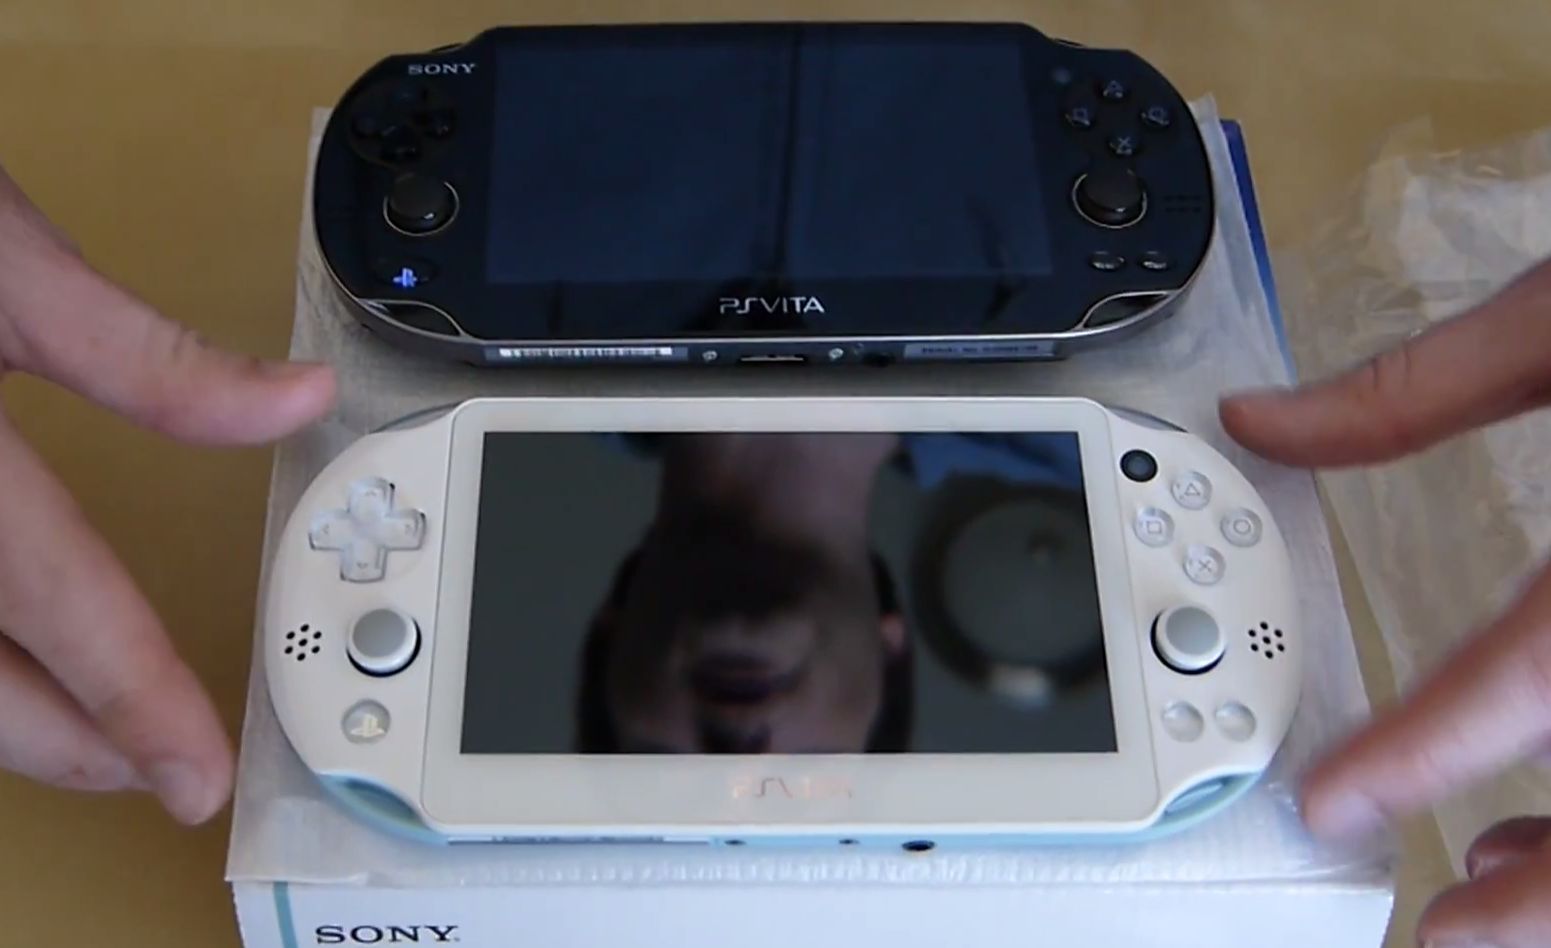 Check Out an In-Depth Comparison Between the New PCH-2000 PS Vita and